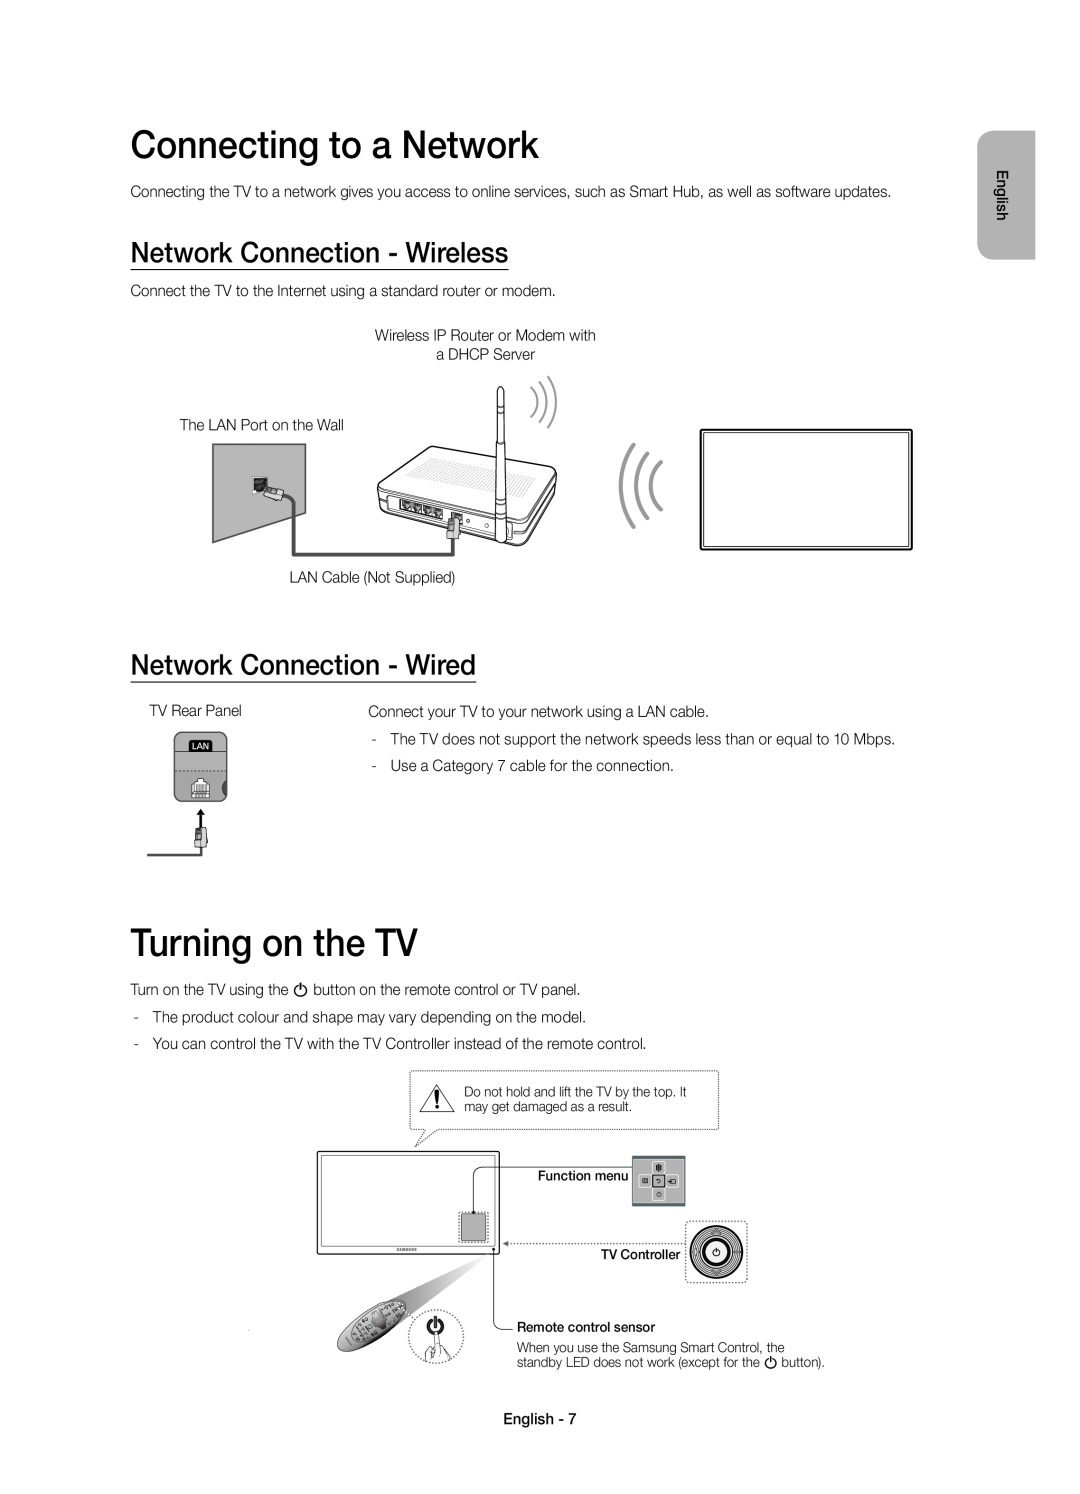 Samsung UE55H6410SSXZG, UE55H6410SSXXH manual Connecting to a Network, Turning on the TV, Network Connection - Wireless 